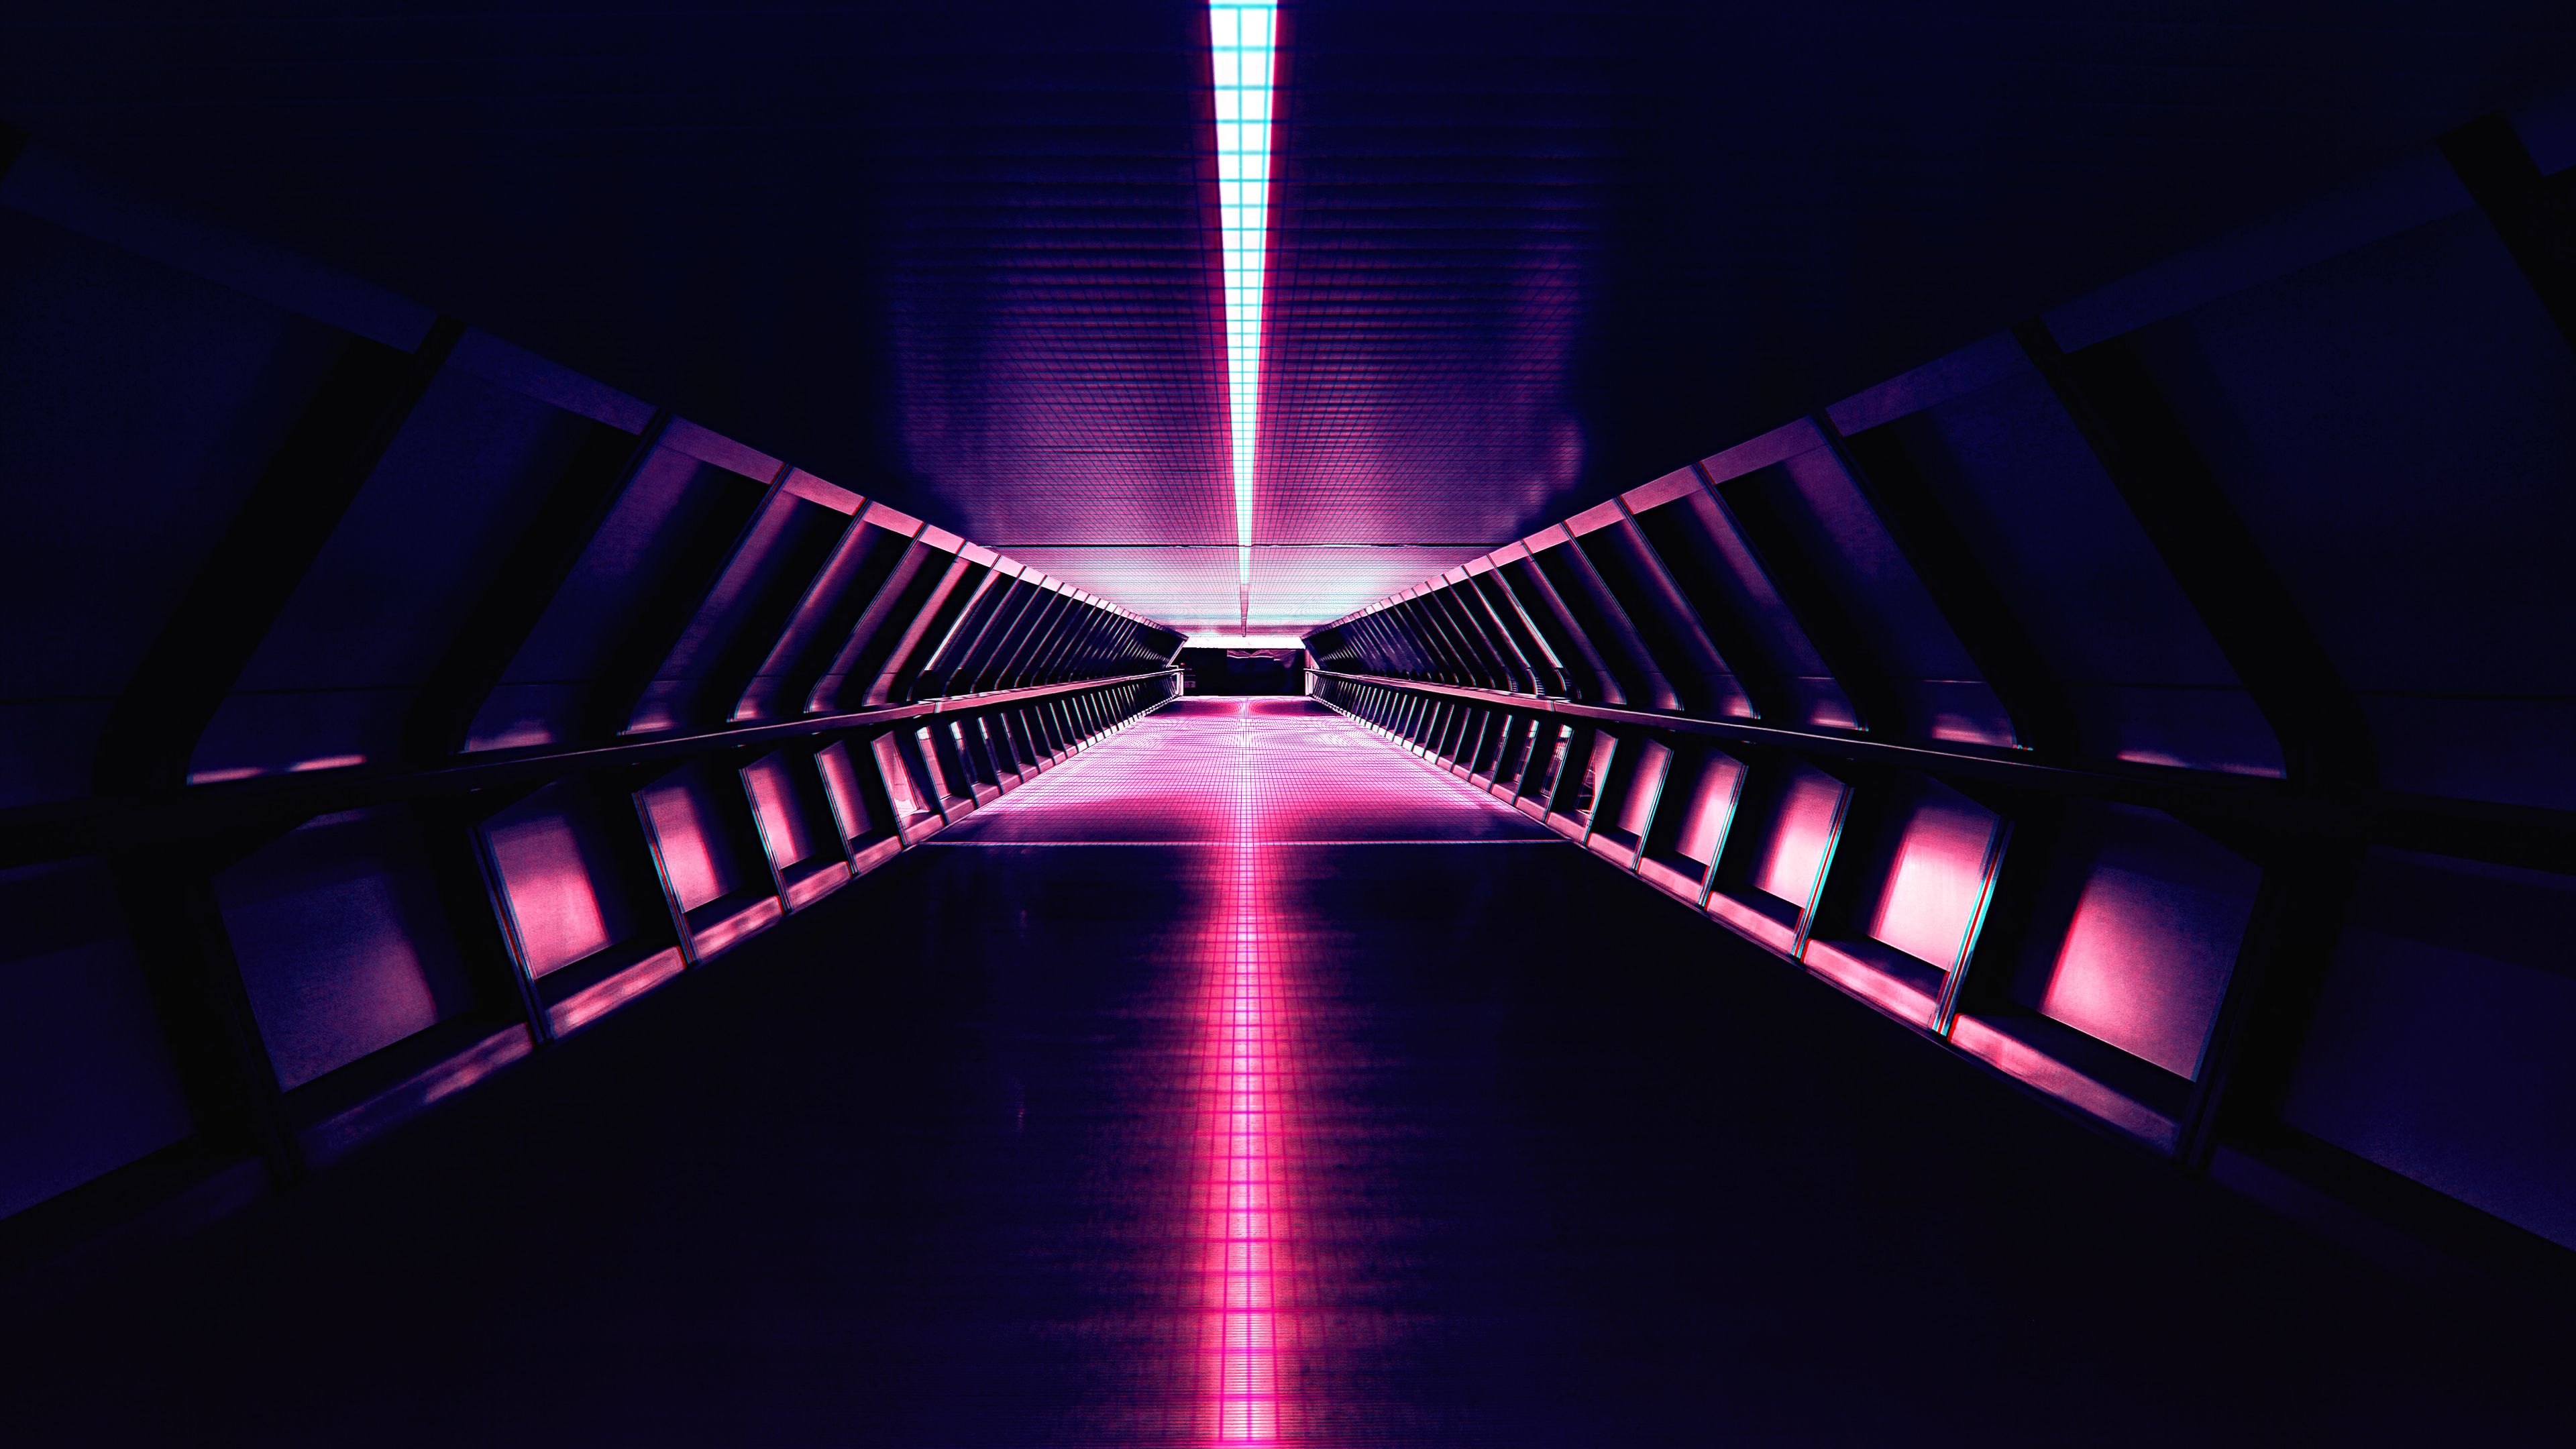 Wallpaper Synthwave, Retro, Electronic music, Neon, Architecture